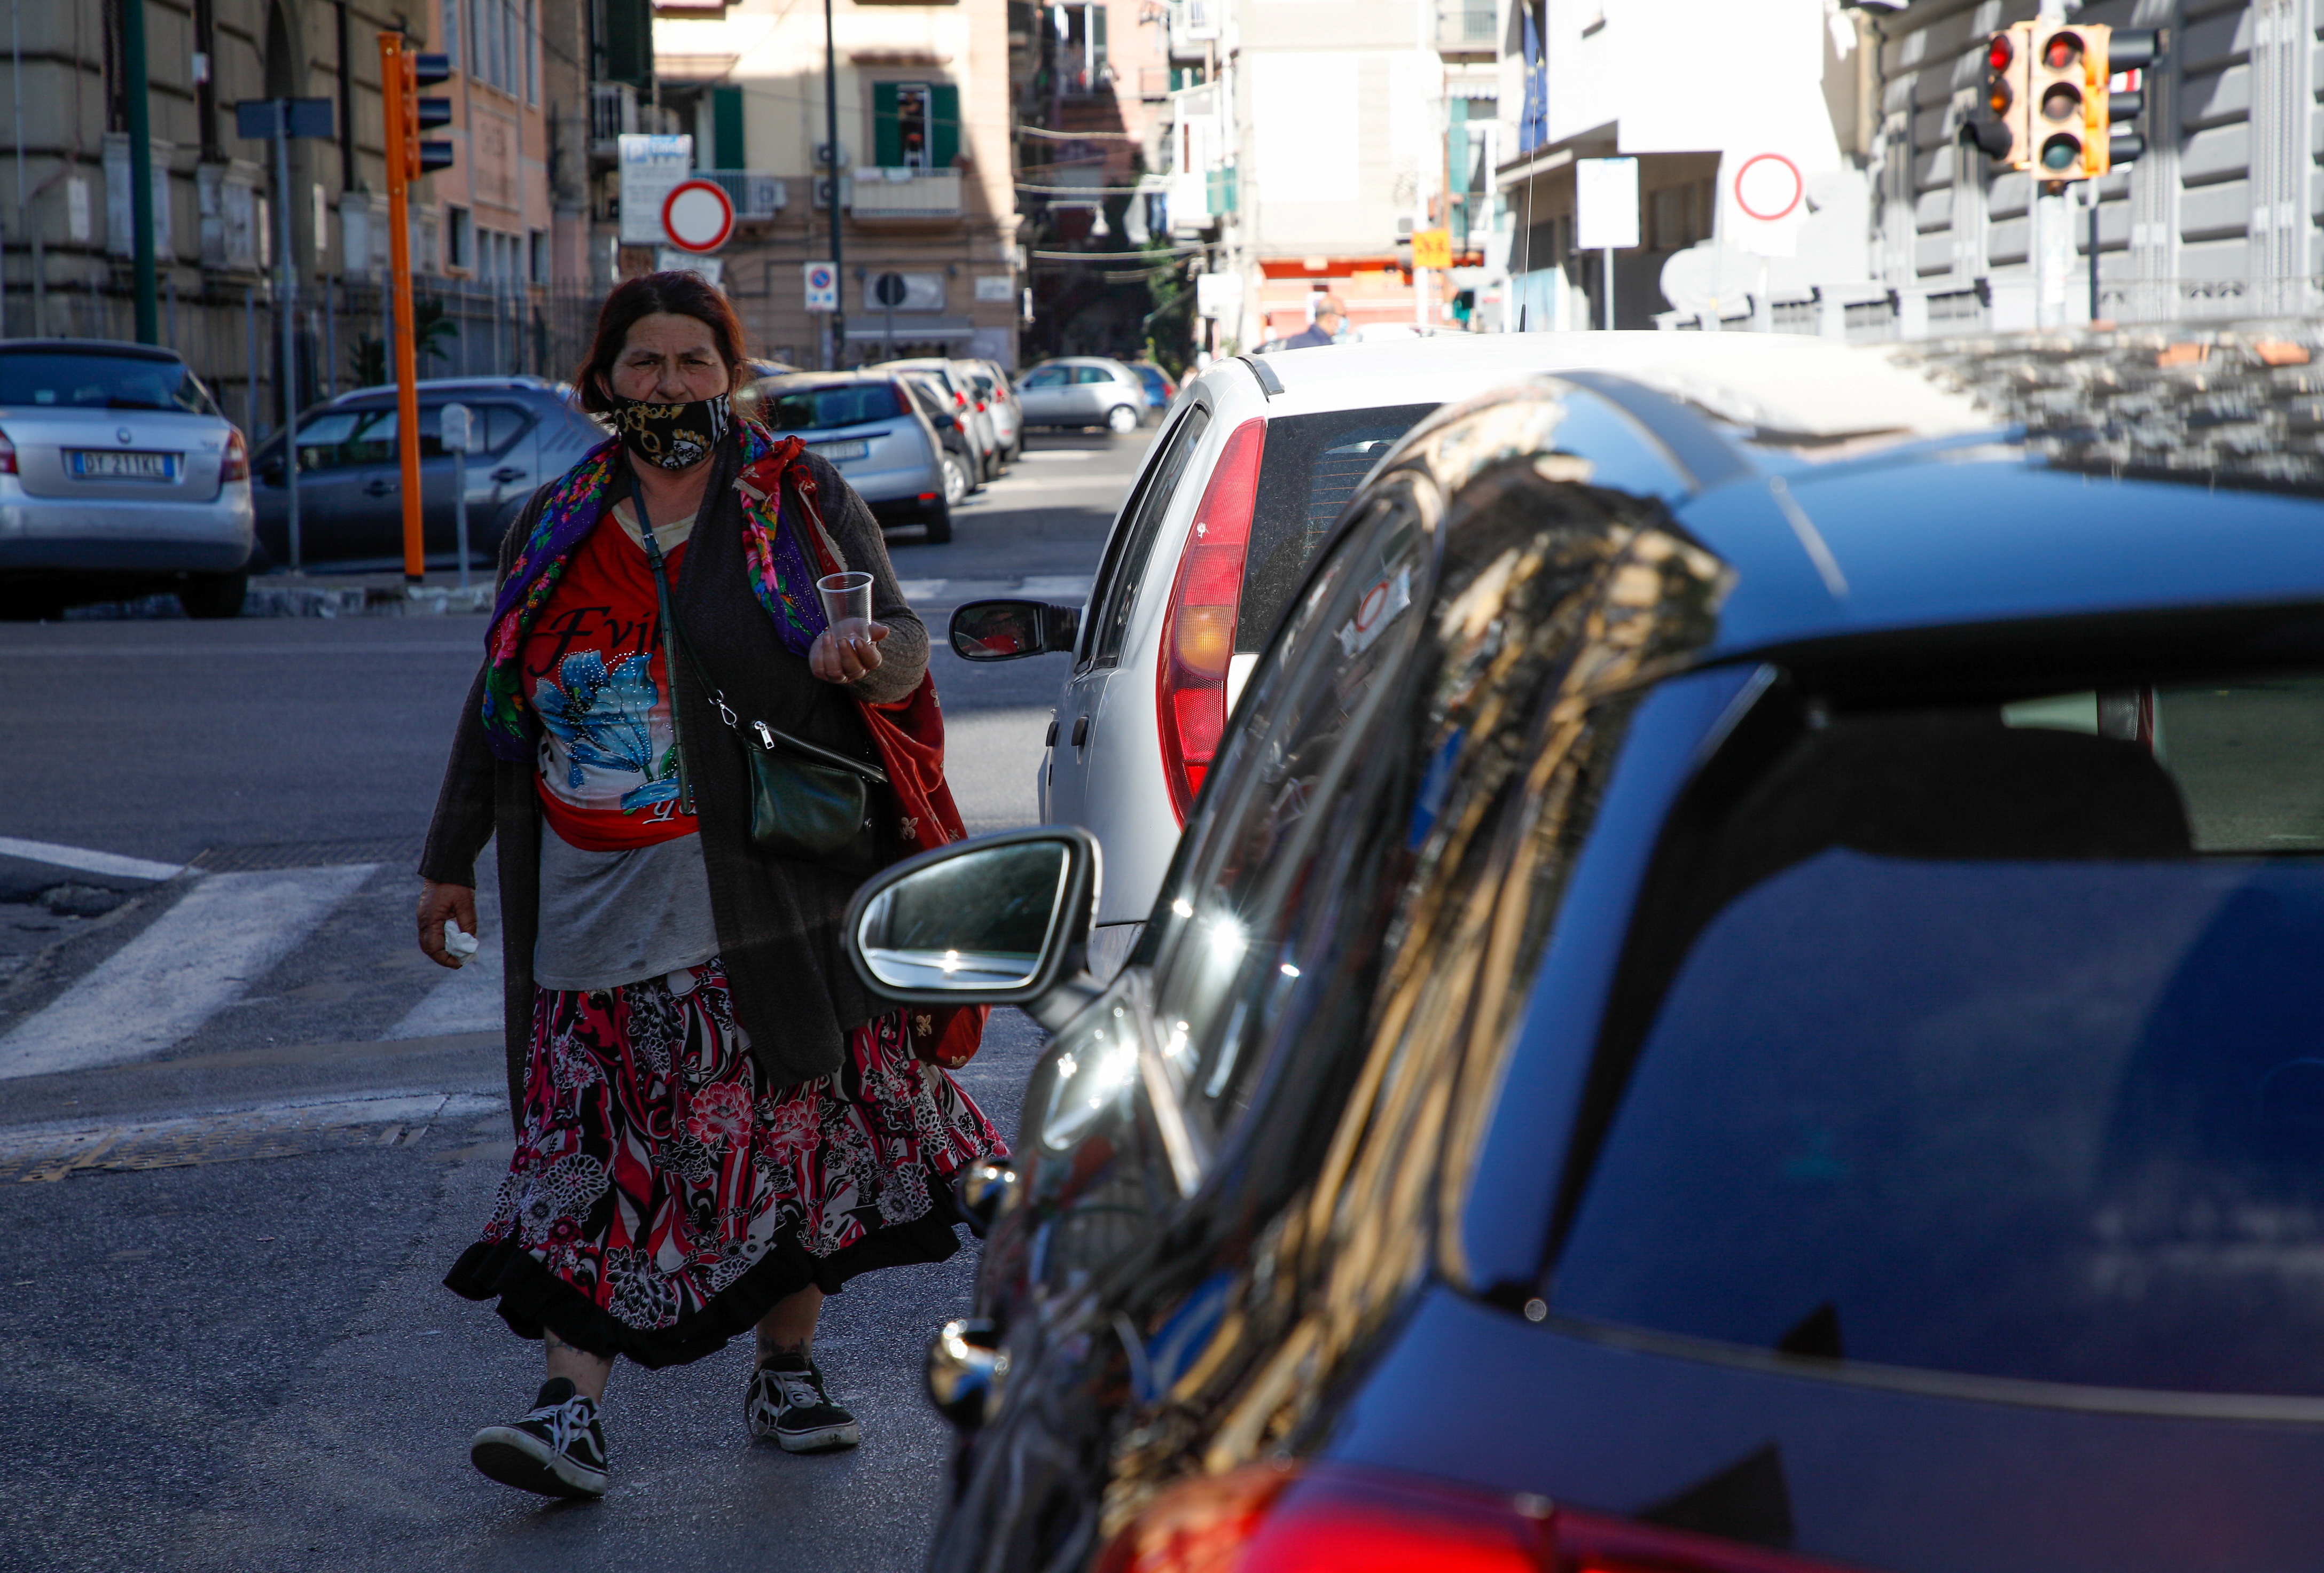 A woman begs on the street in Naples